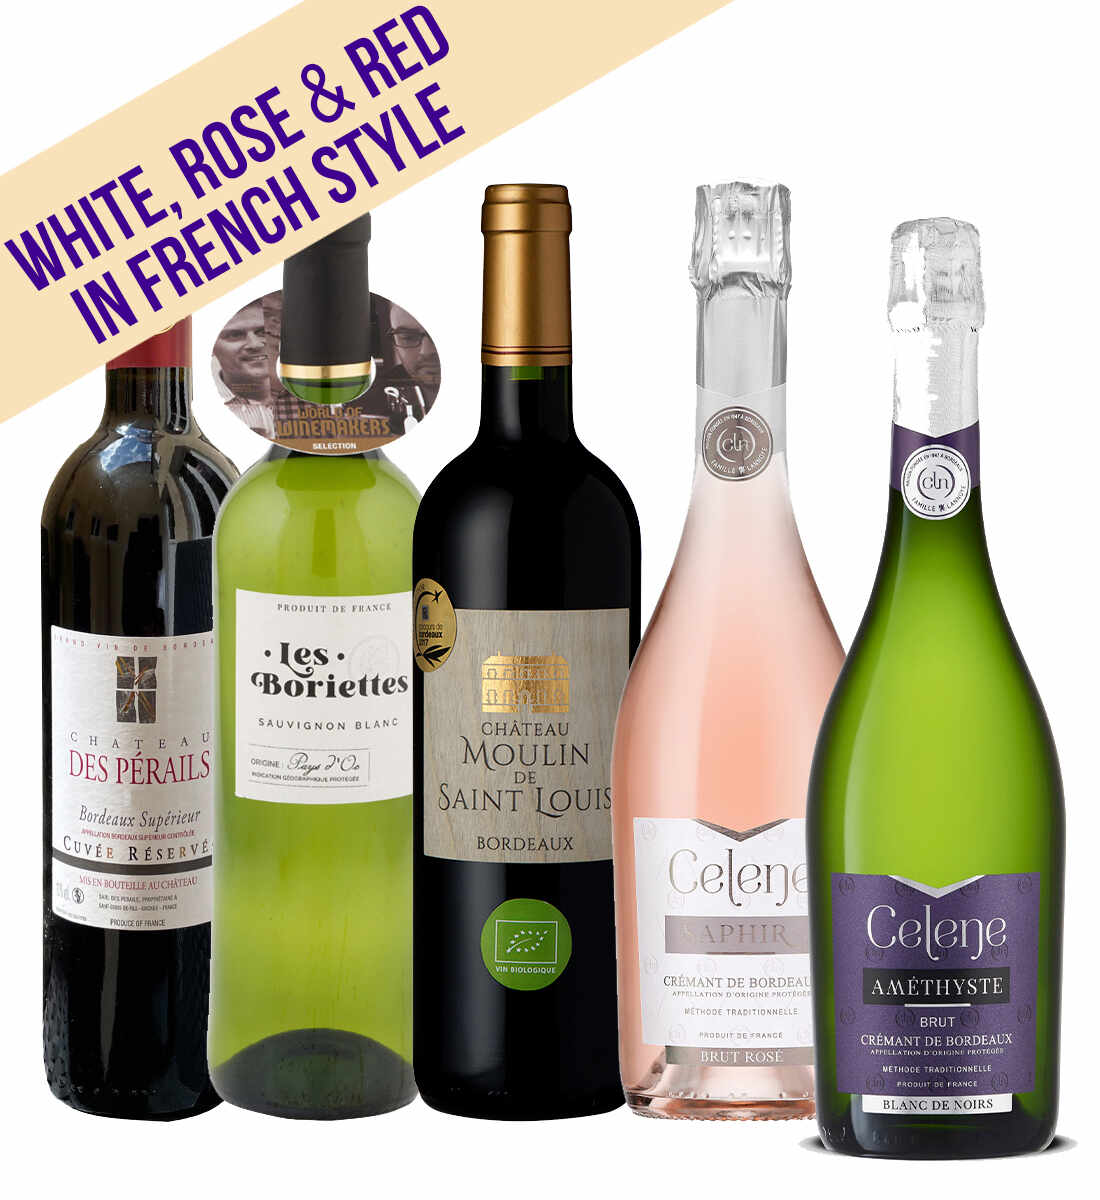 Party Box WHITE, ROZE & RED IN FRENCH STYLE TASTING BOX